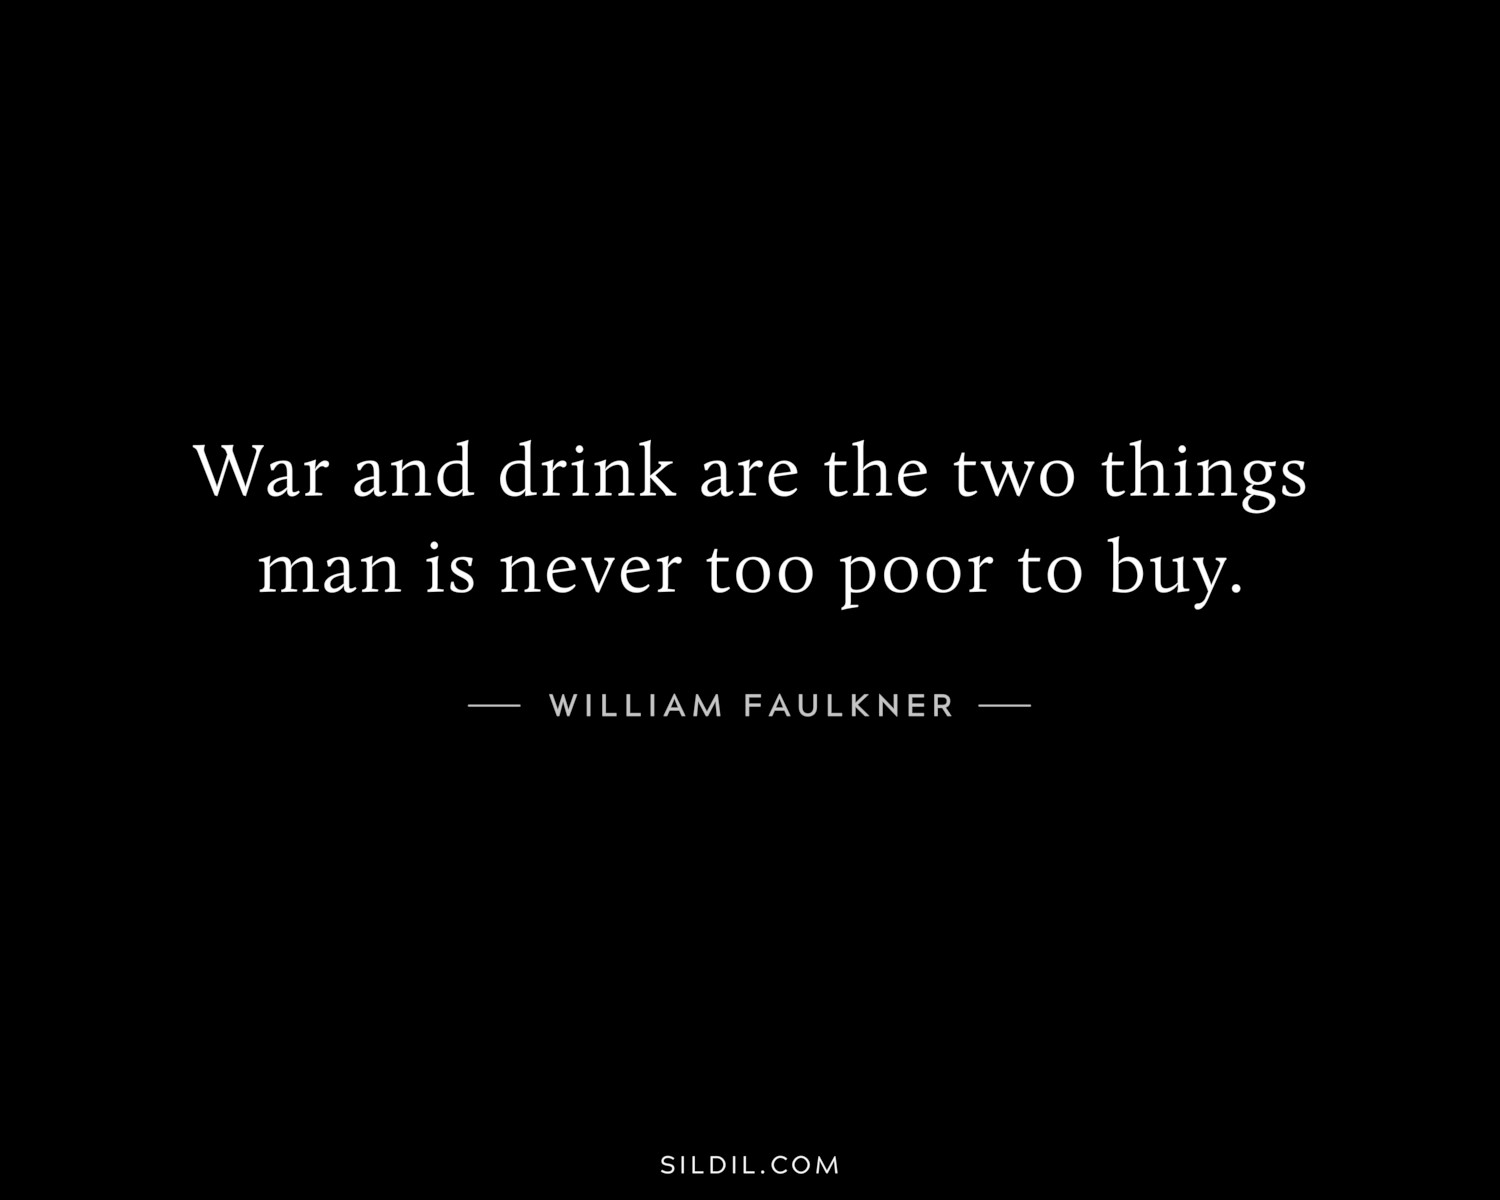 War and drink are the two things man is never too poor to buy.